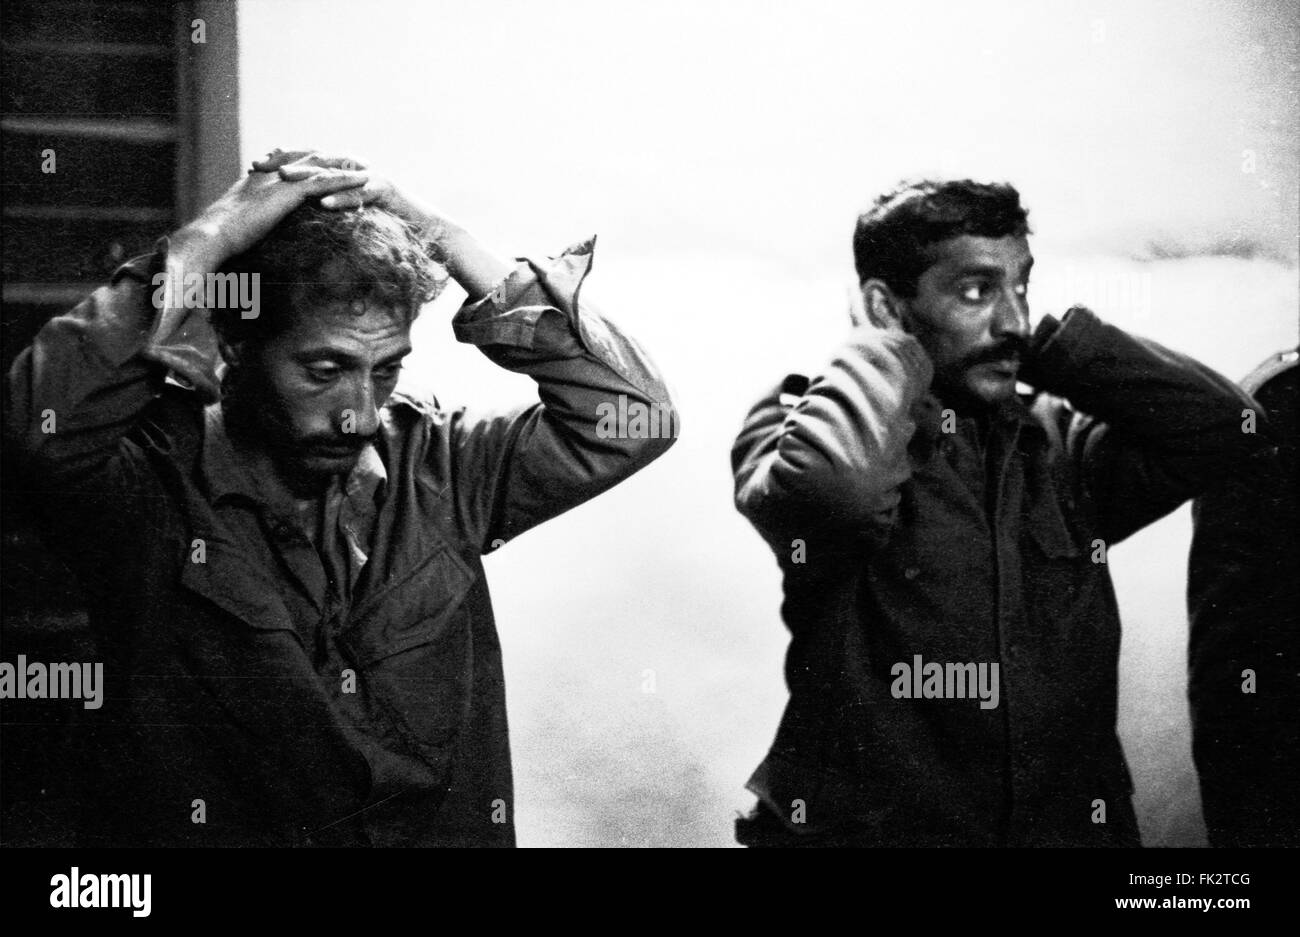 Zakho, northern Iraq, Kurdistan. March 1991. Iraqi army prisoners of Kurdistan Front fighters at night, during the uprising by Kurds against forces of Saddam Hussein's government. Photo by:Richard Wayman Stock Photo